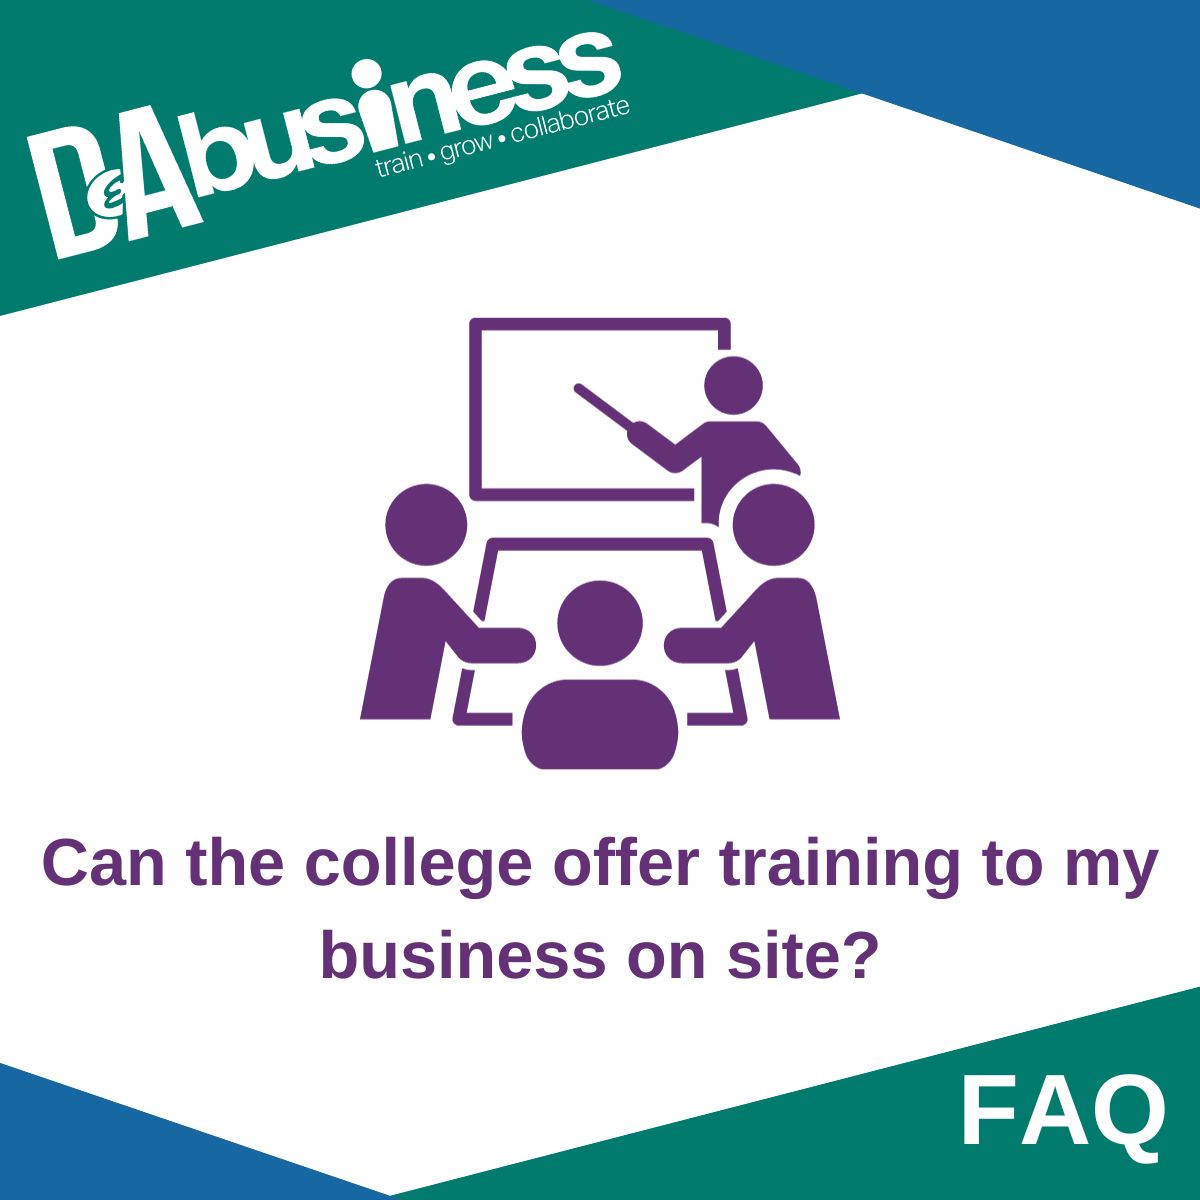 Can @dundee_angus offer training to my business on site❓ Yes, we offer training in certain fields to businesses at times that suits them such as around operational hours. Get in touch with our Business Partnerships Team to find out more ⬇️ pulse.ly/a6orrz0qau #DABusiness